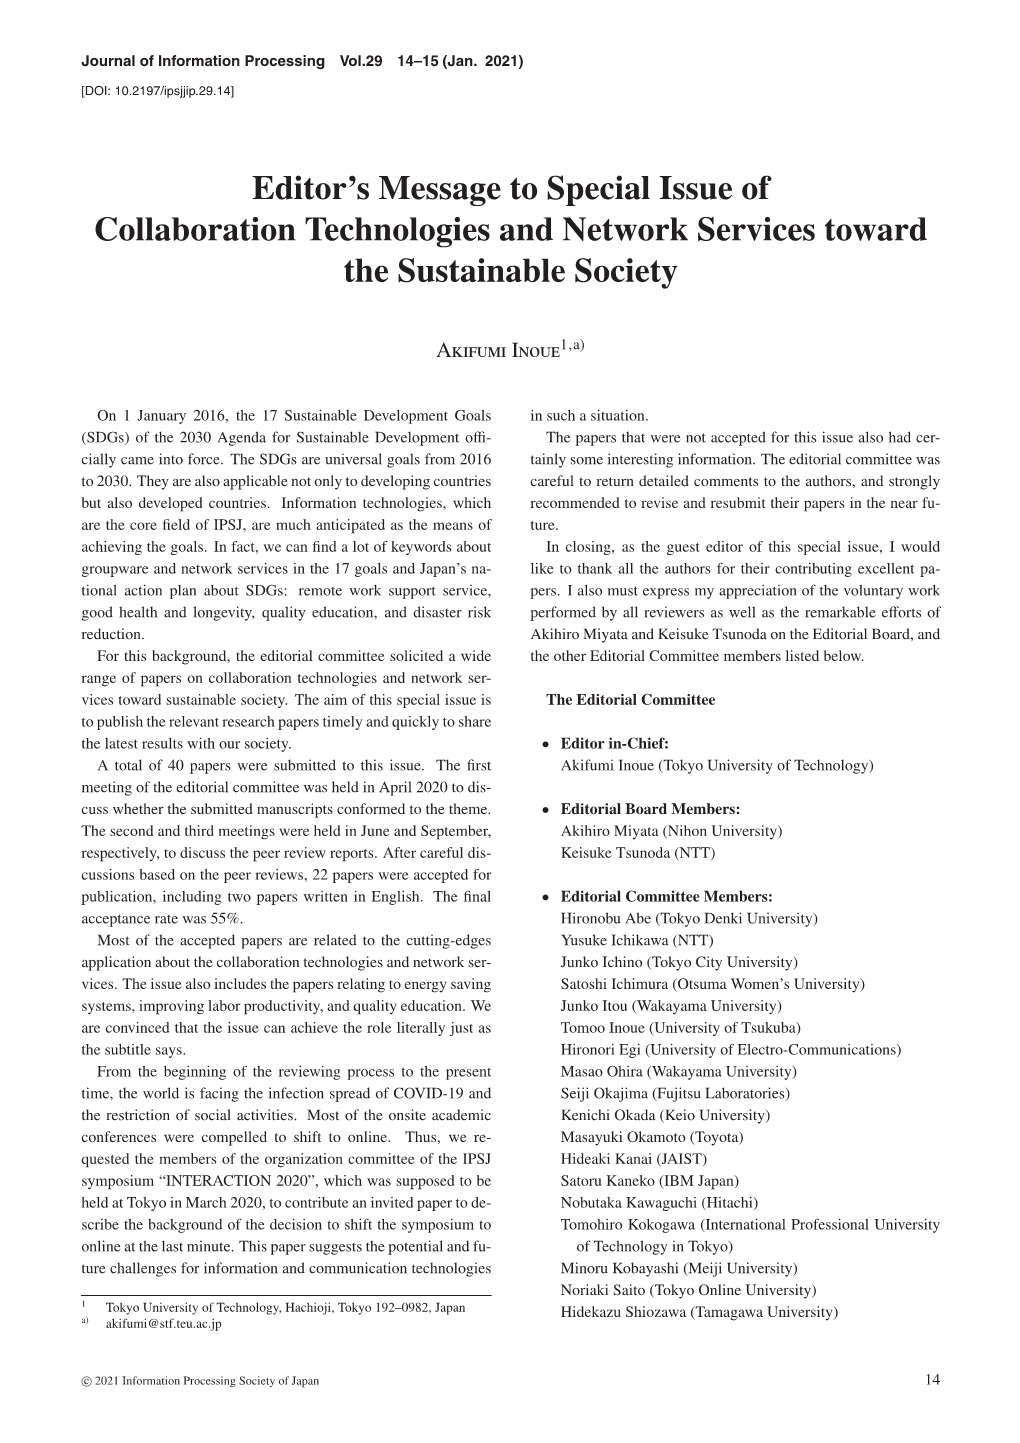 Editor's Message to Special Issue of Collaboration Technologies And